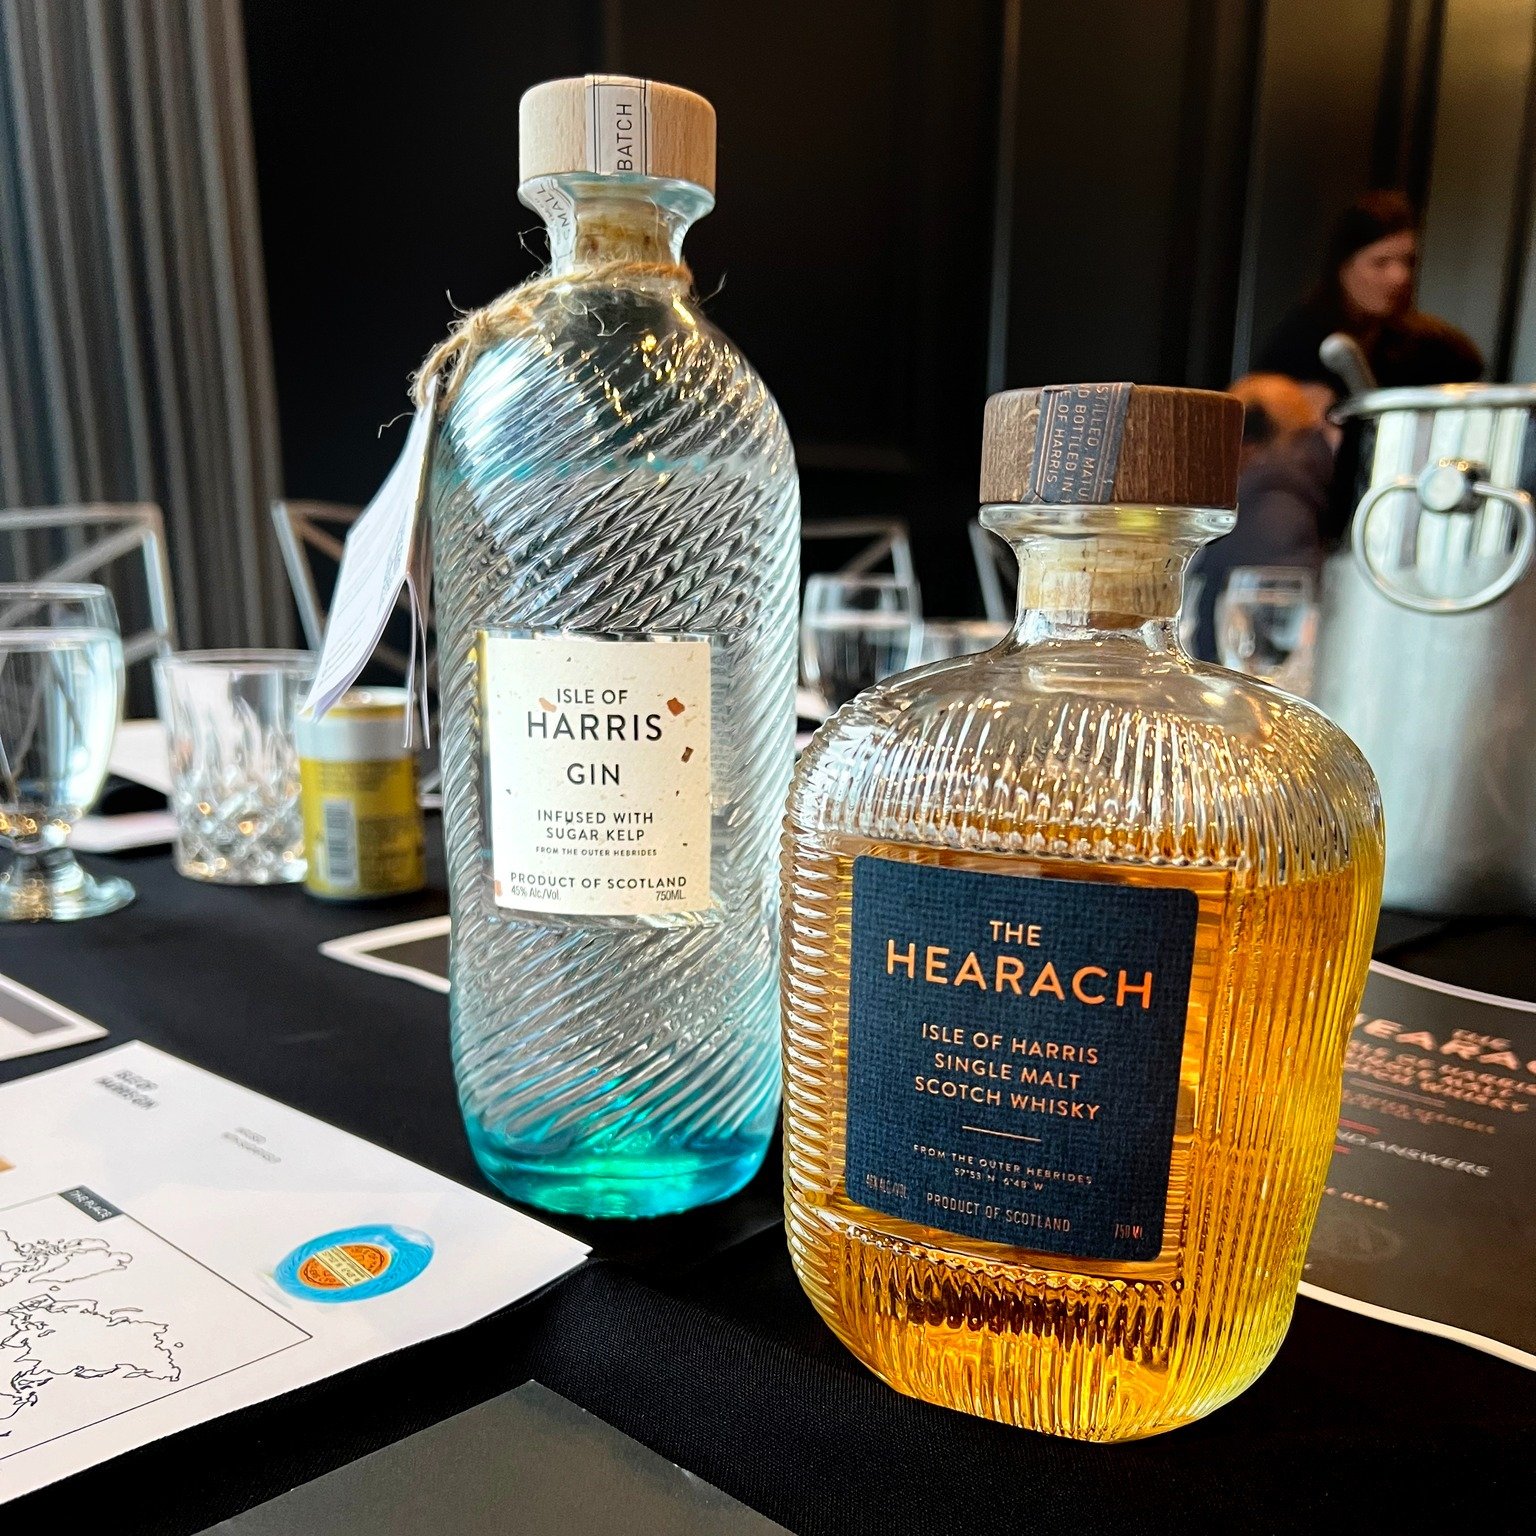 MISA was proud to work with isle of Harris distillers and Dallas Tower club to host a lunch and learn for our local Spec's team. 

The event was a success with a decidedly &lsquo;Harris&rsquo; feel to it! Isle of Harris Gin and The Hearach Single Mal